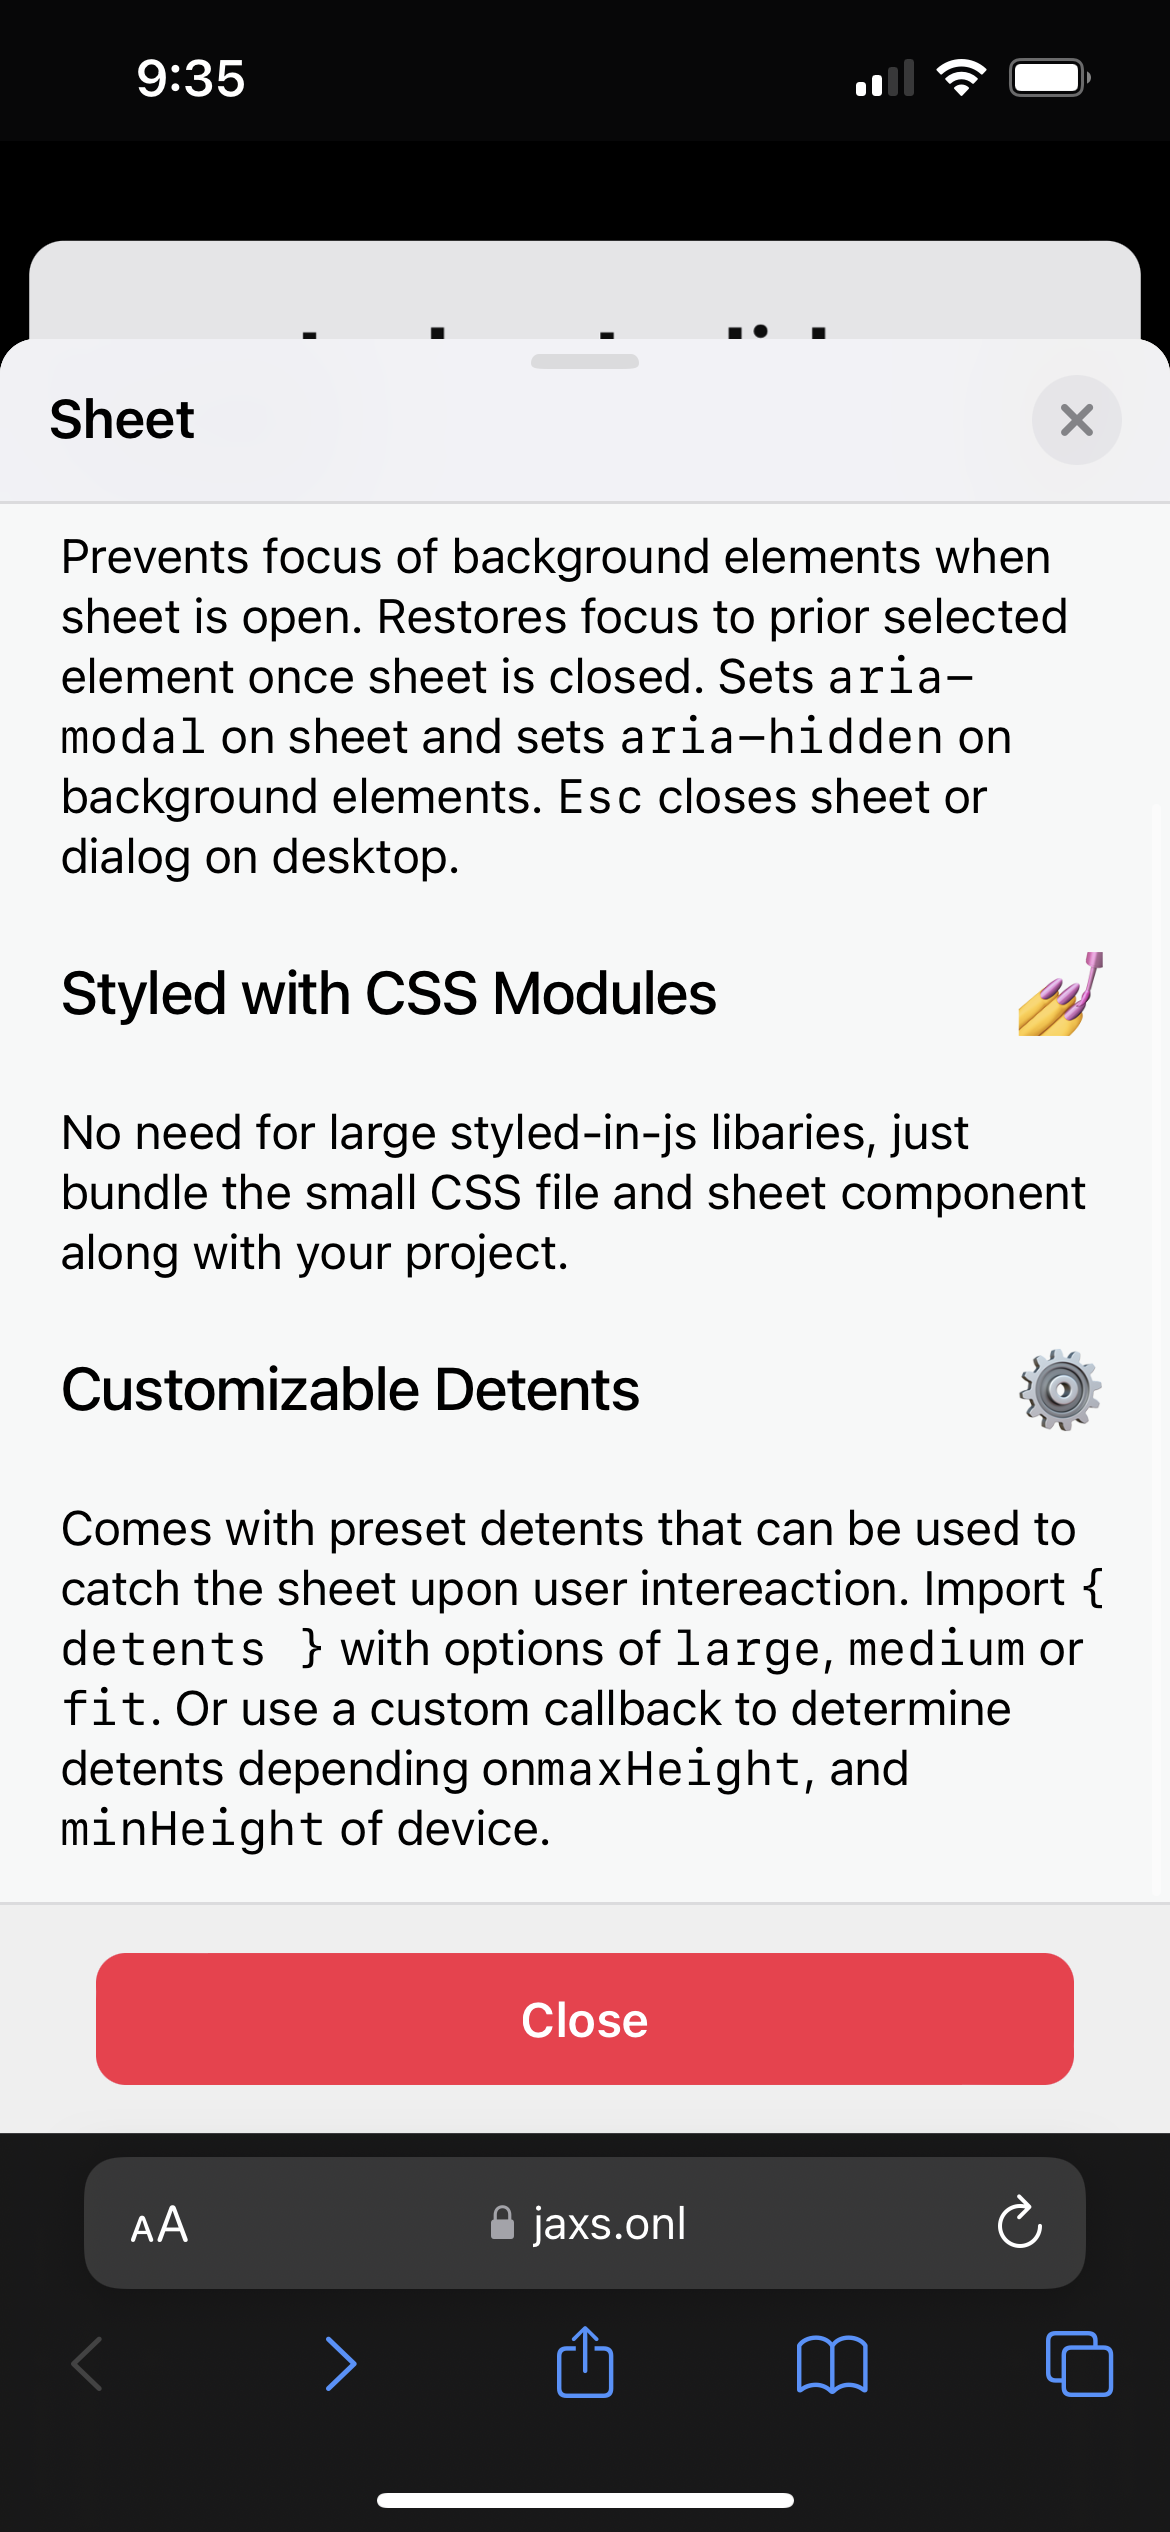 react-sheet-slide fully expanded and scrolled down in light mode.